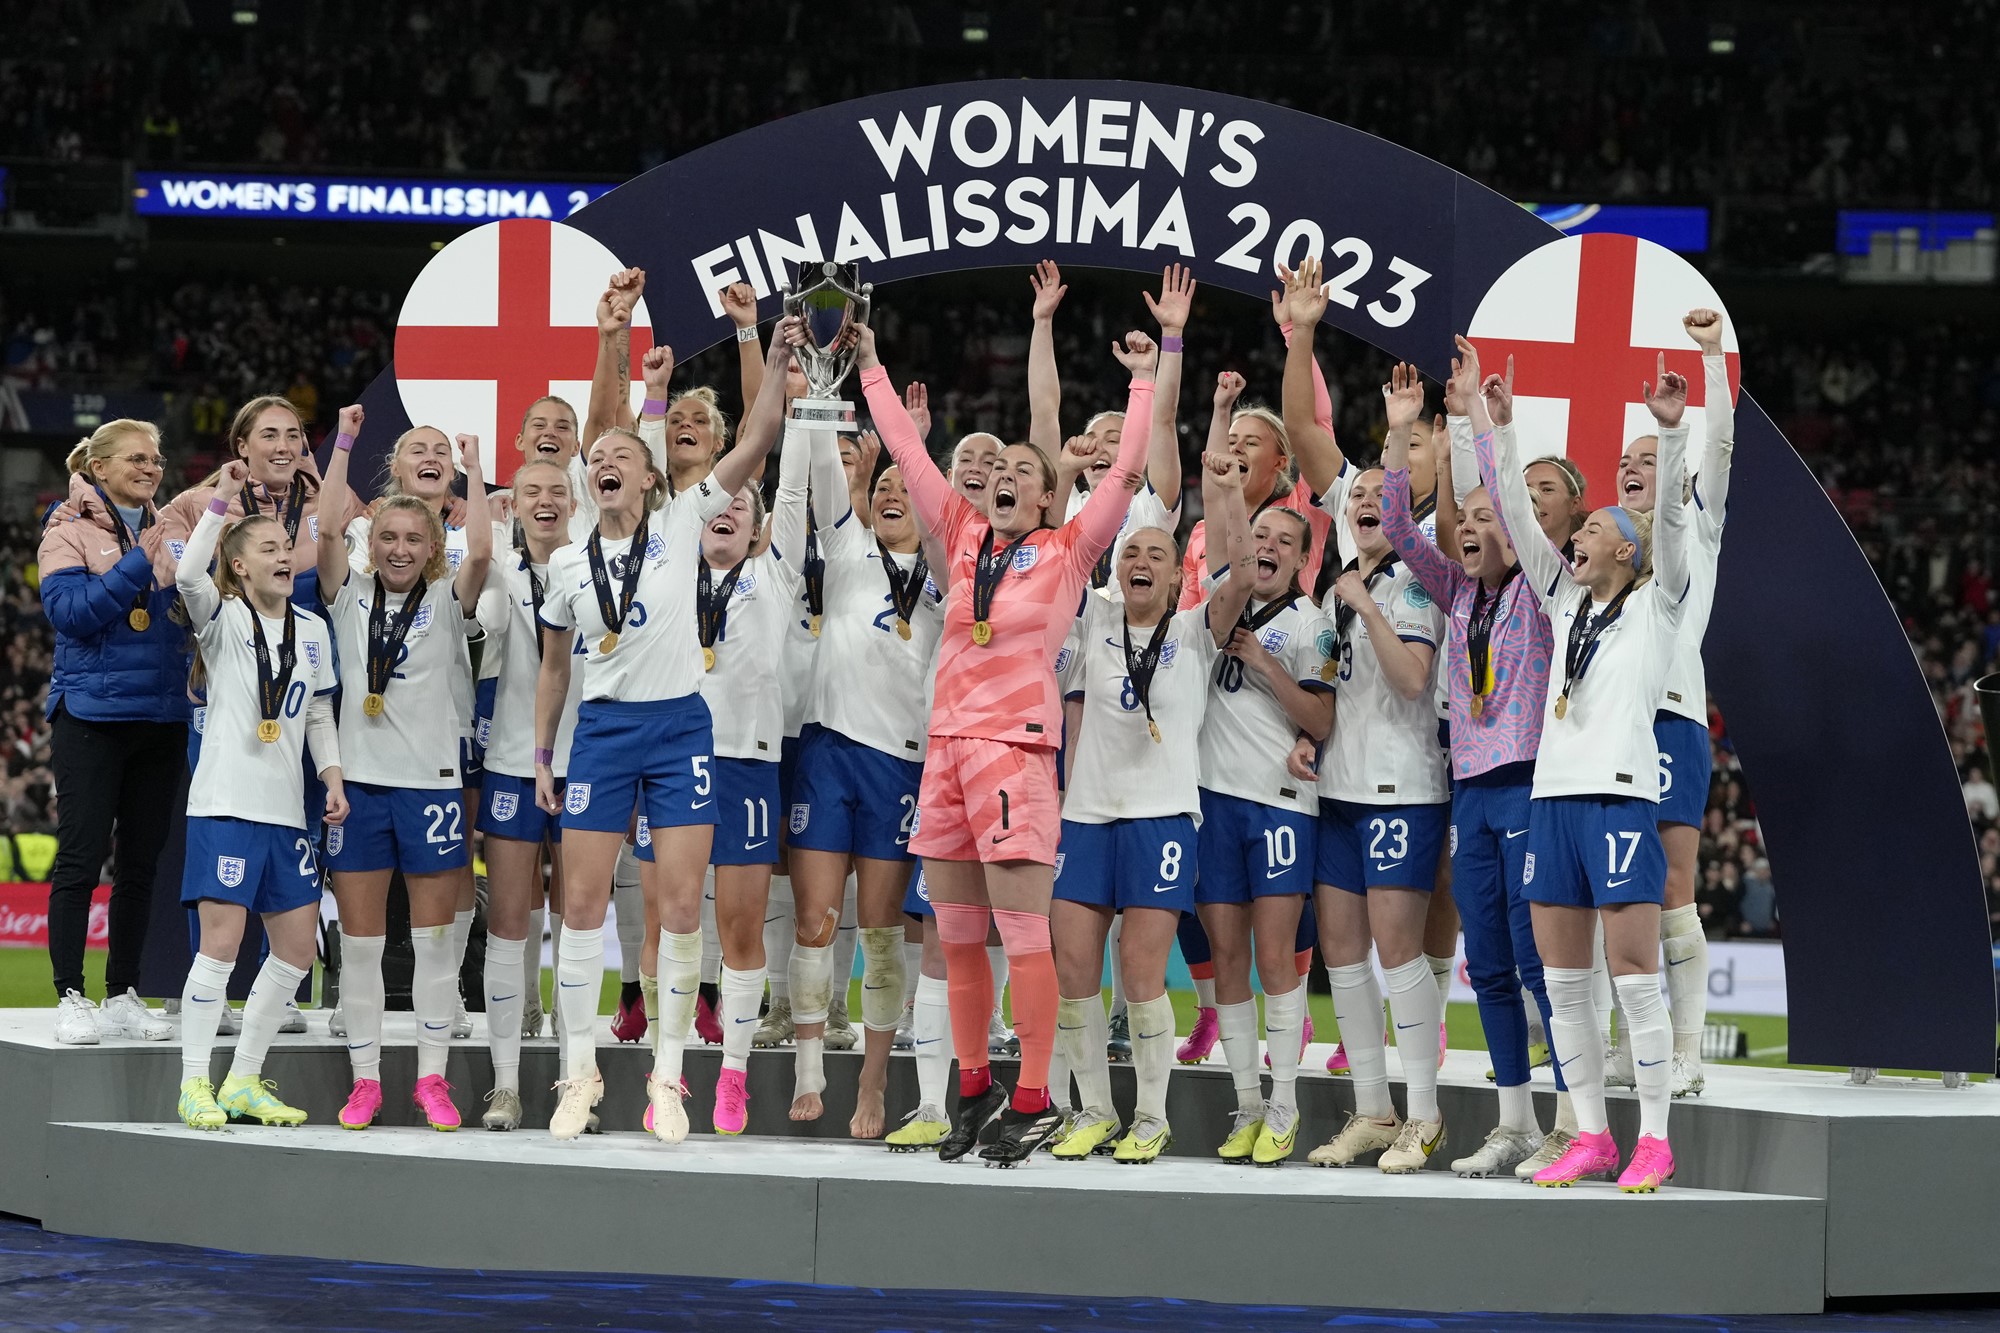 The England women's team chears holding a trophy under teh Women's Finalissima 2023 banner. 